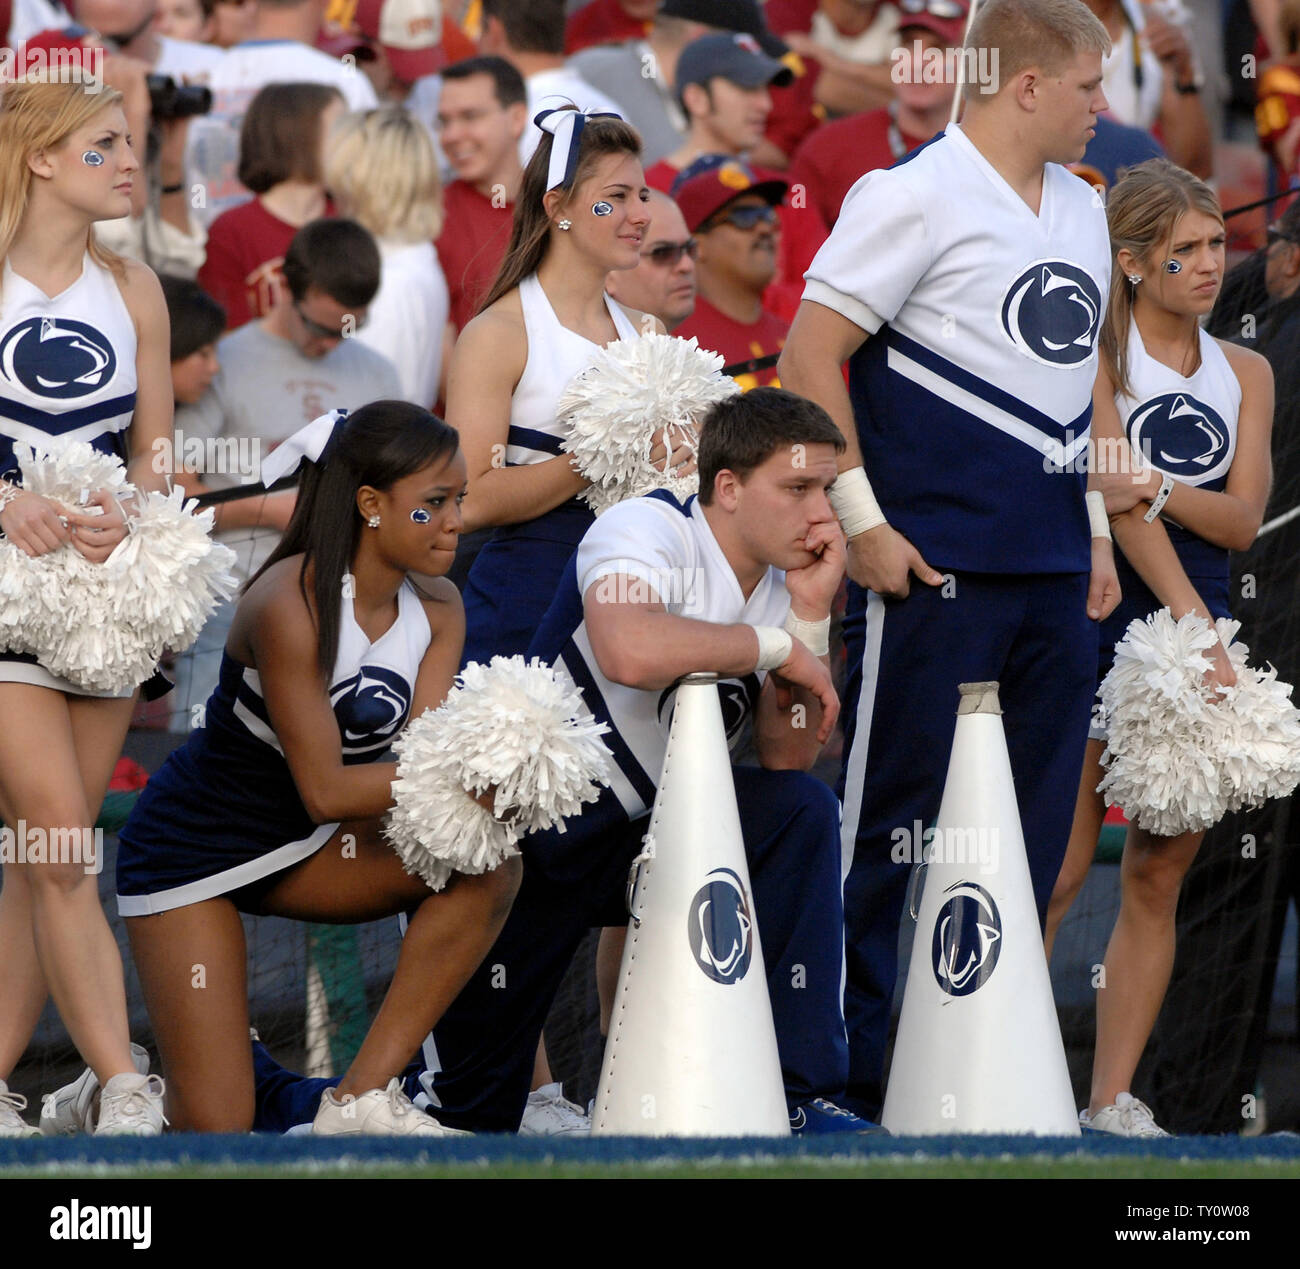 Penn State Nittany Lions cheerleaders have nothing to cheer about as they watch their team lose to the USC Trojans 38-24 in the 95th Rose Bowl Game in Pasadena, California on January 1, 2009. (UPI Photo/Shotaro Yamada) Stock Photo